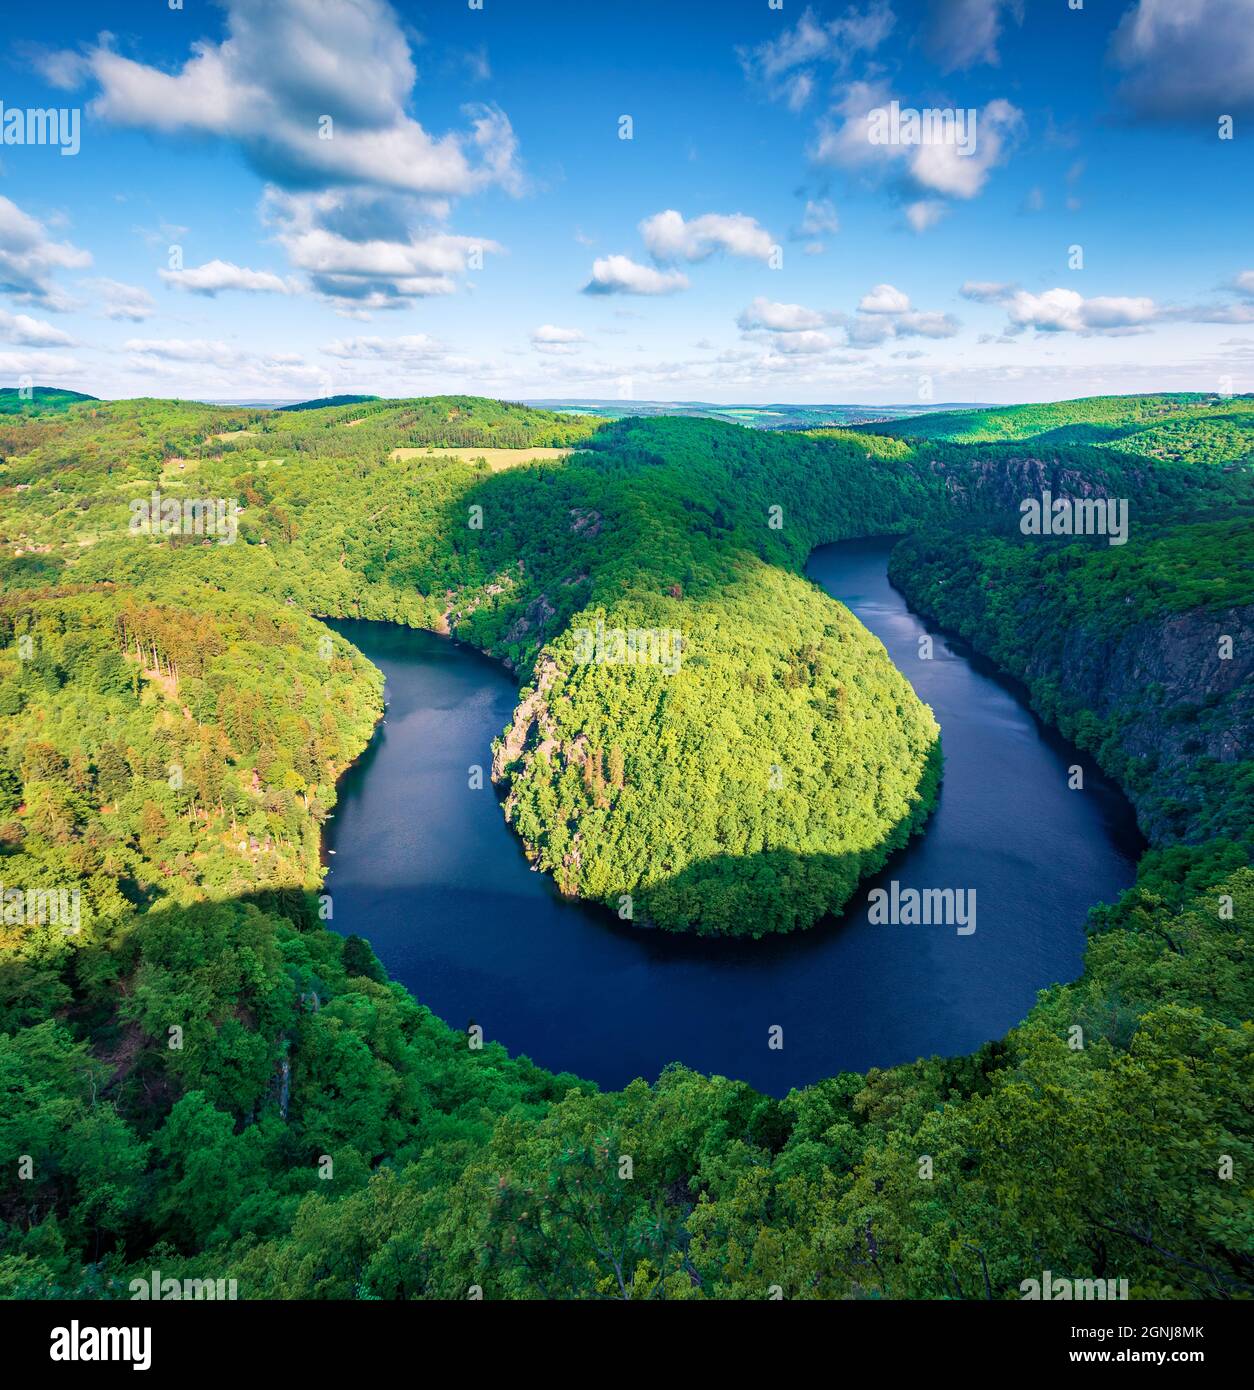 Astonishing morning view of Vltava river horseshoe shape meander from Maj viewpoint. Breathtaking summer scene of mountain canyon in Czech Republic. B Stock Photo